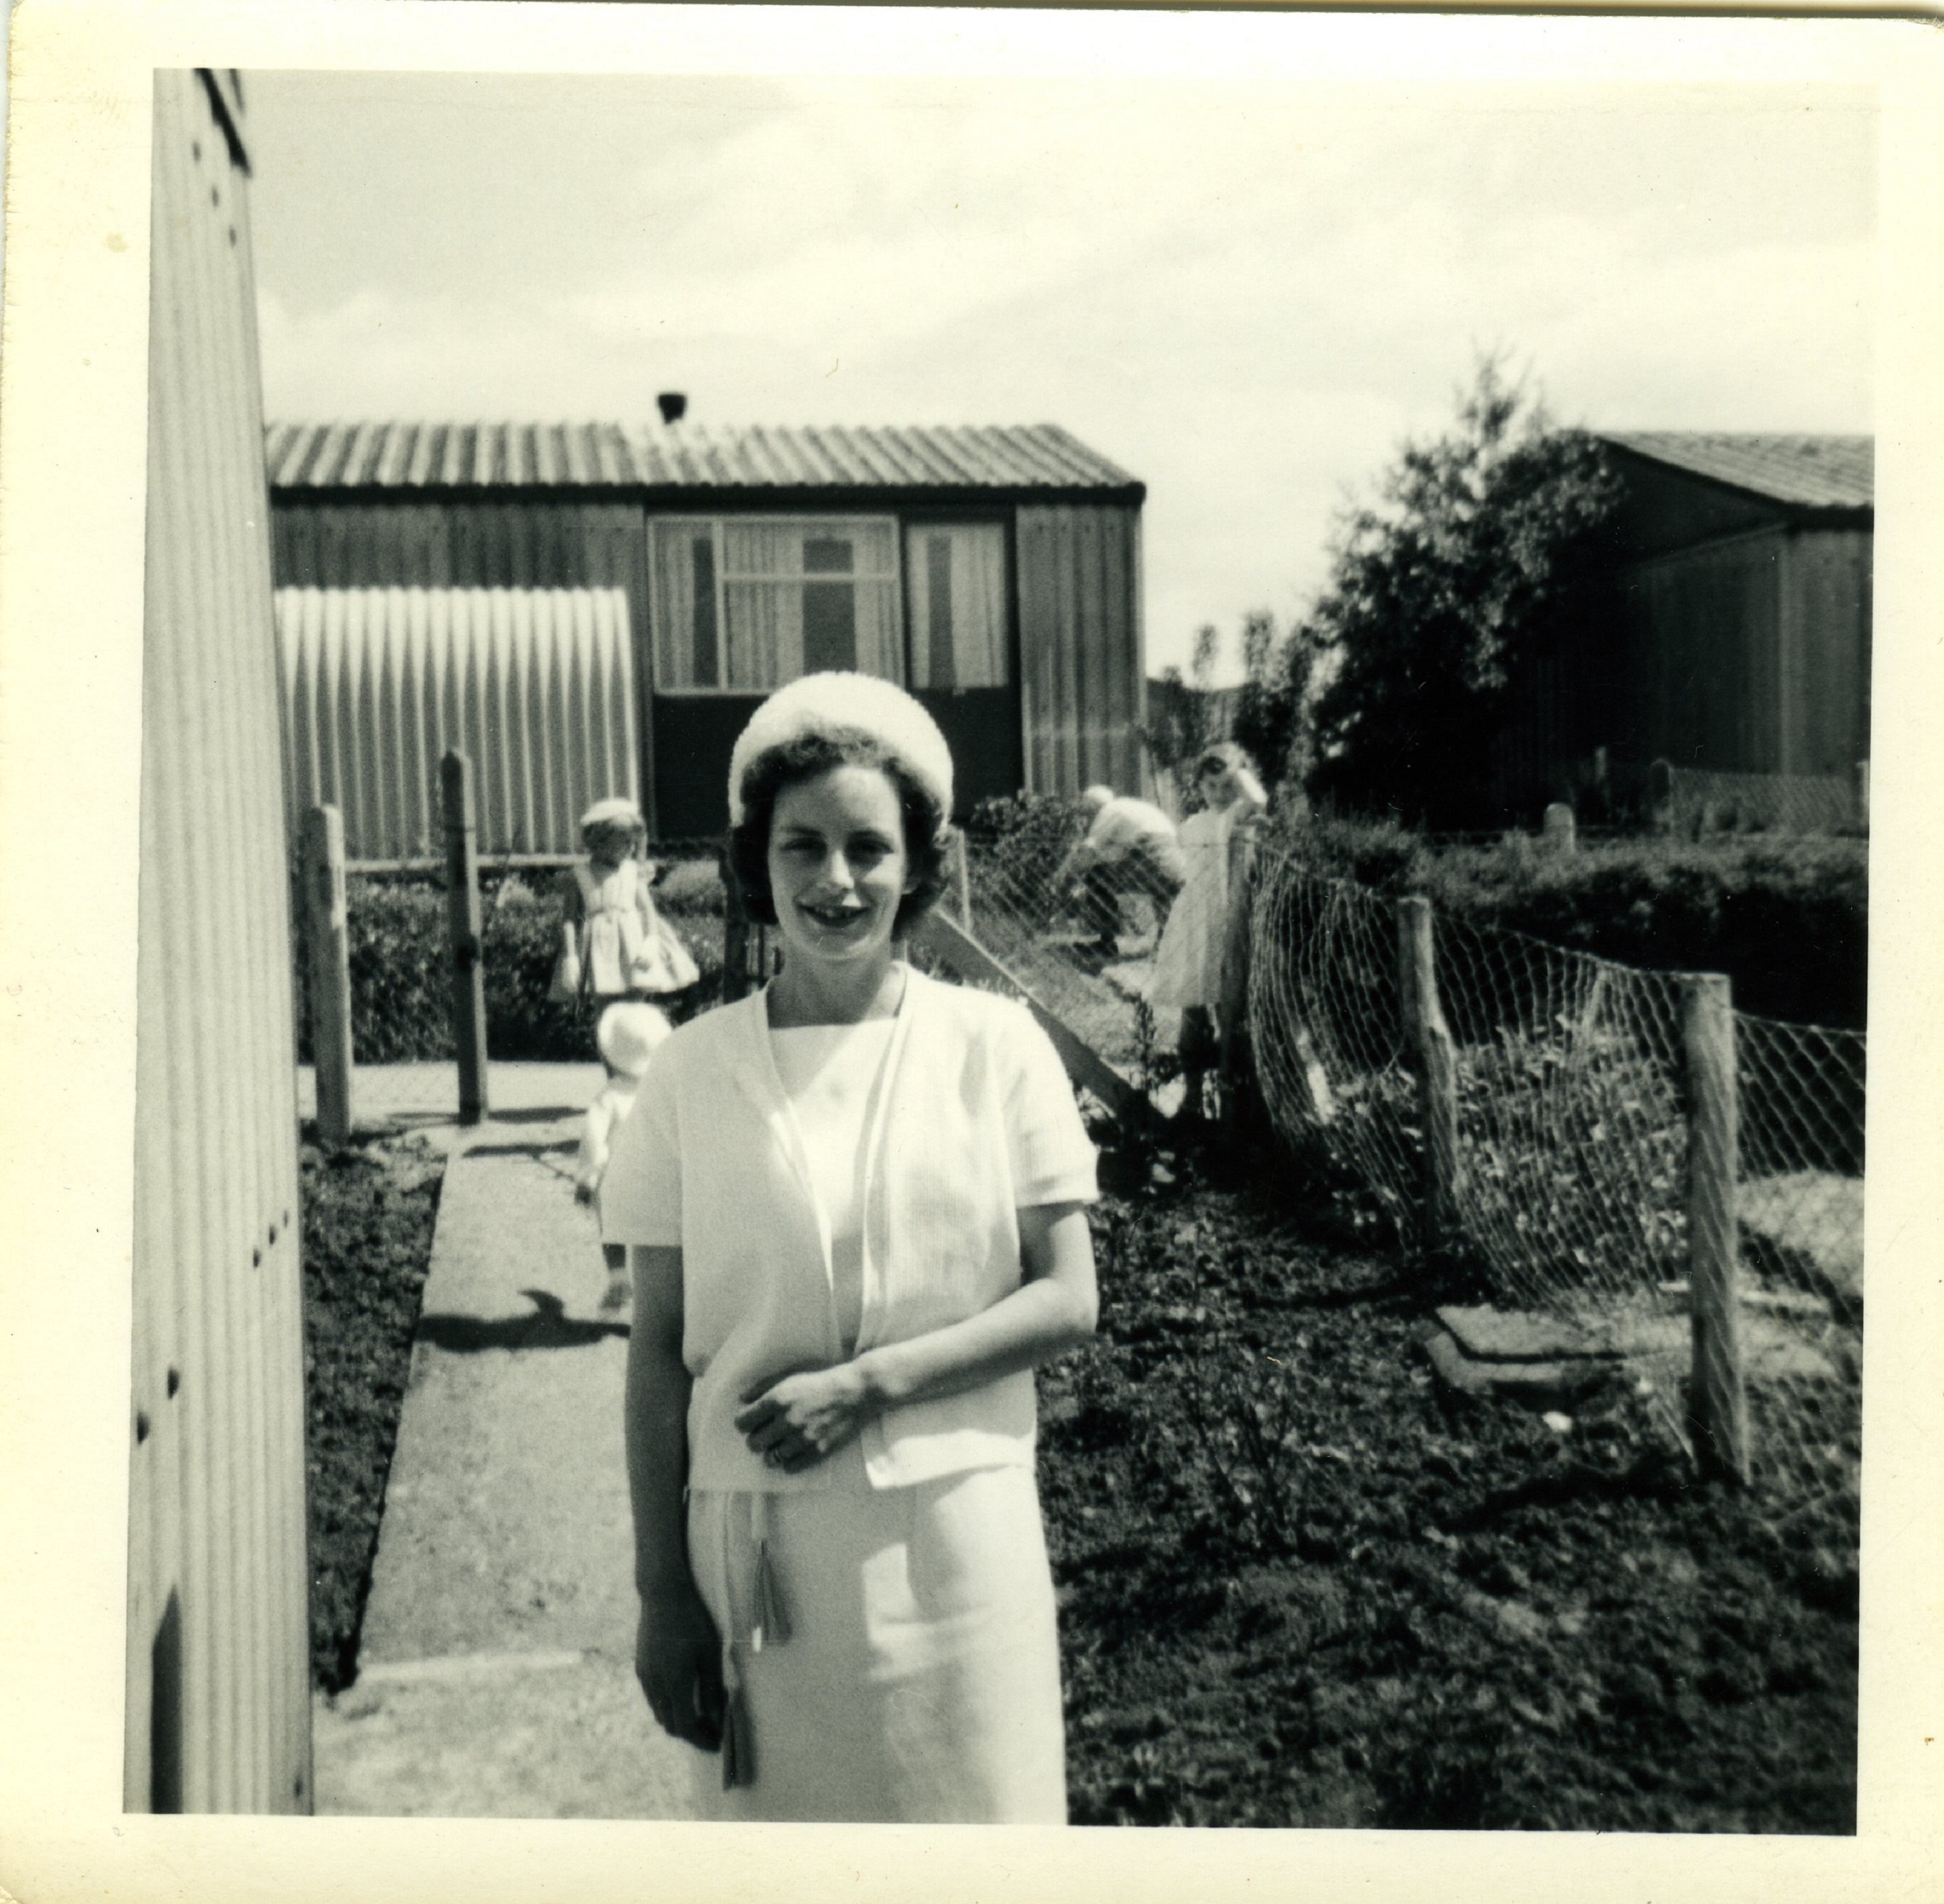 Diane, Alan Page's wife, in front of their Arcon MkV prefab